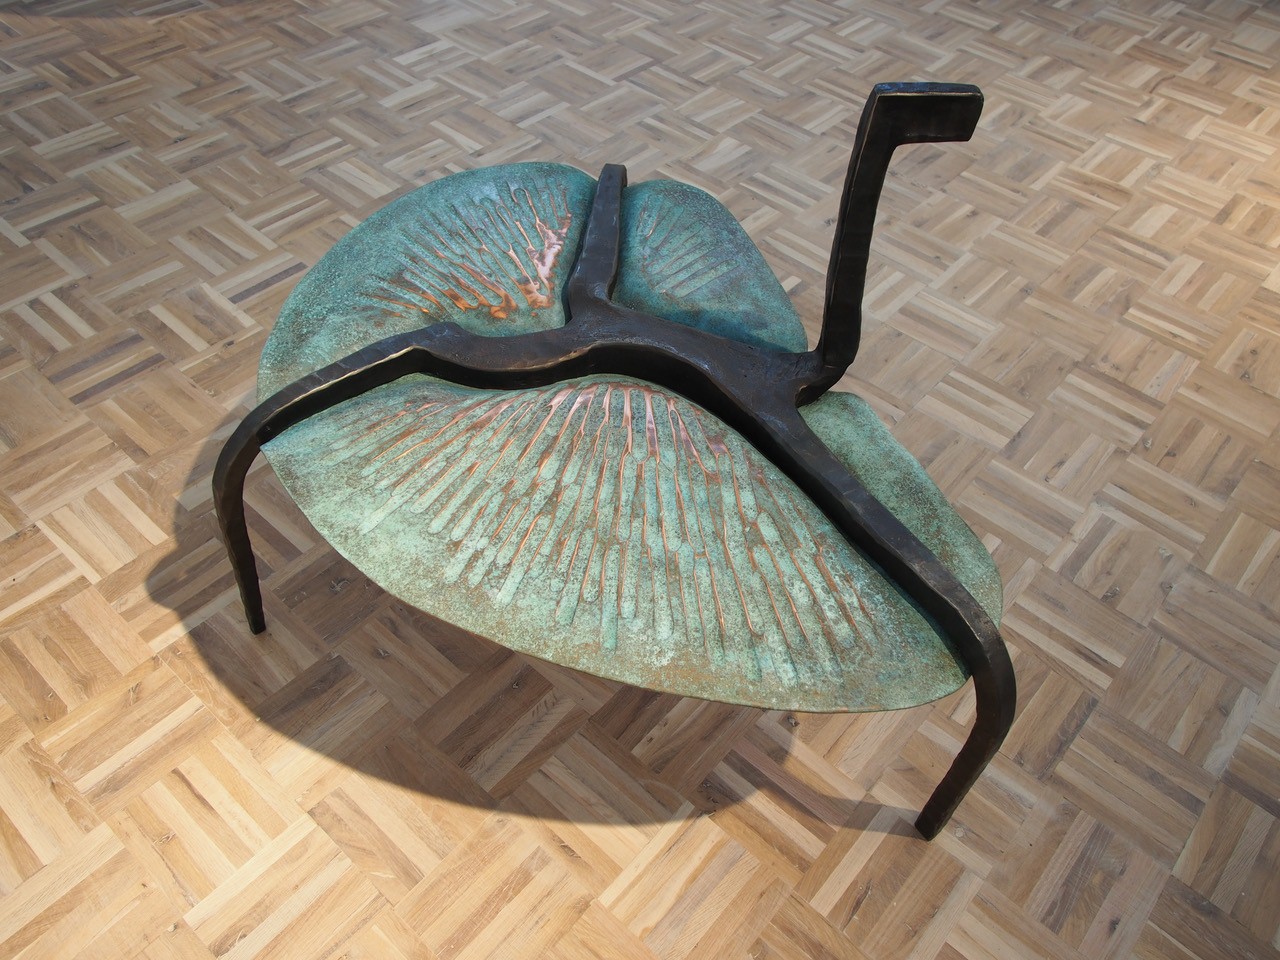 Conrad Hicks 'Implement Table', Southern Guild